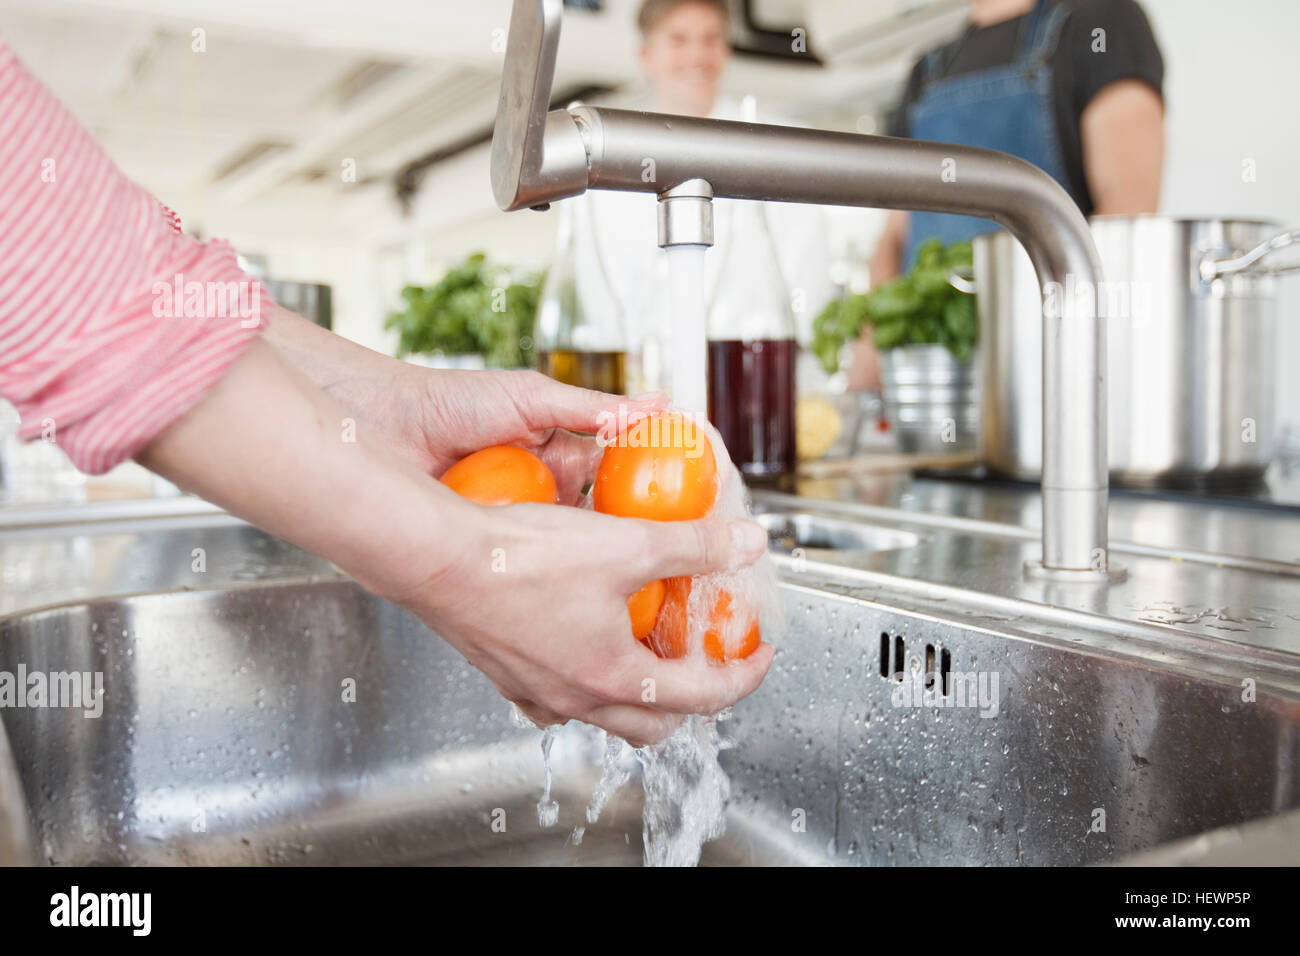 Cropped view of woman's hands washing tomatoes under tap Stock Photo